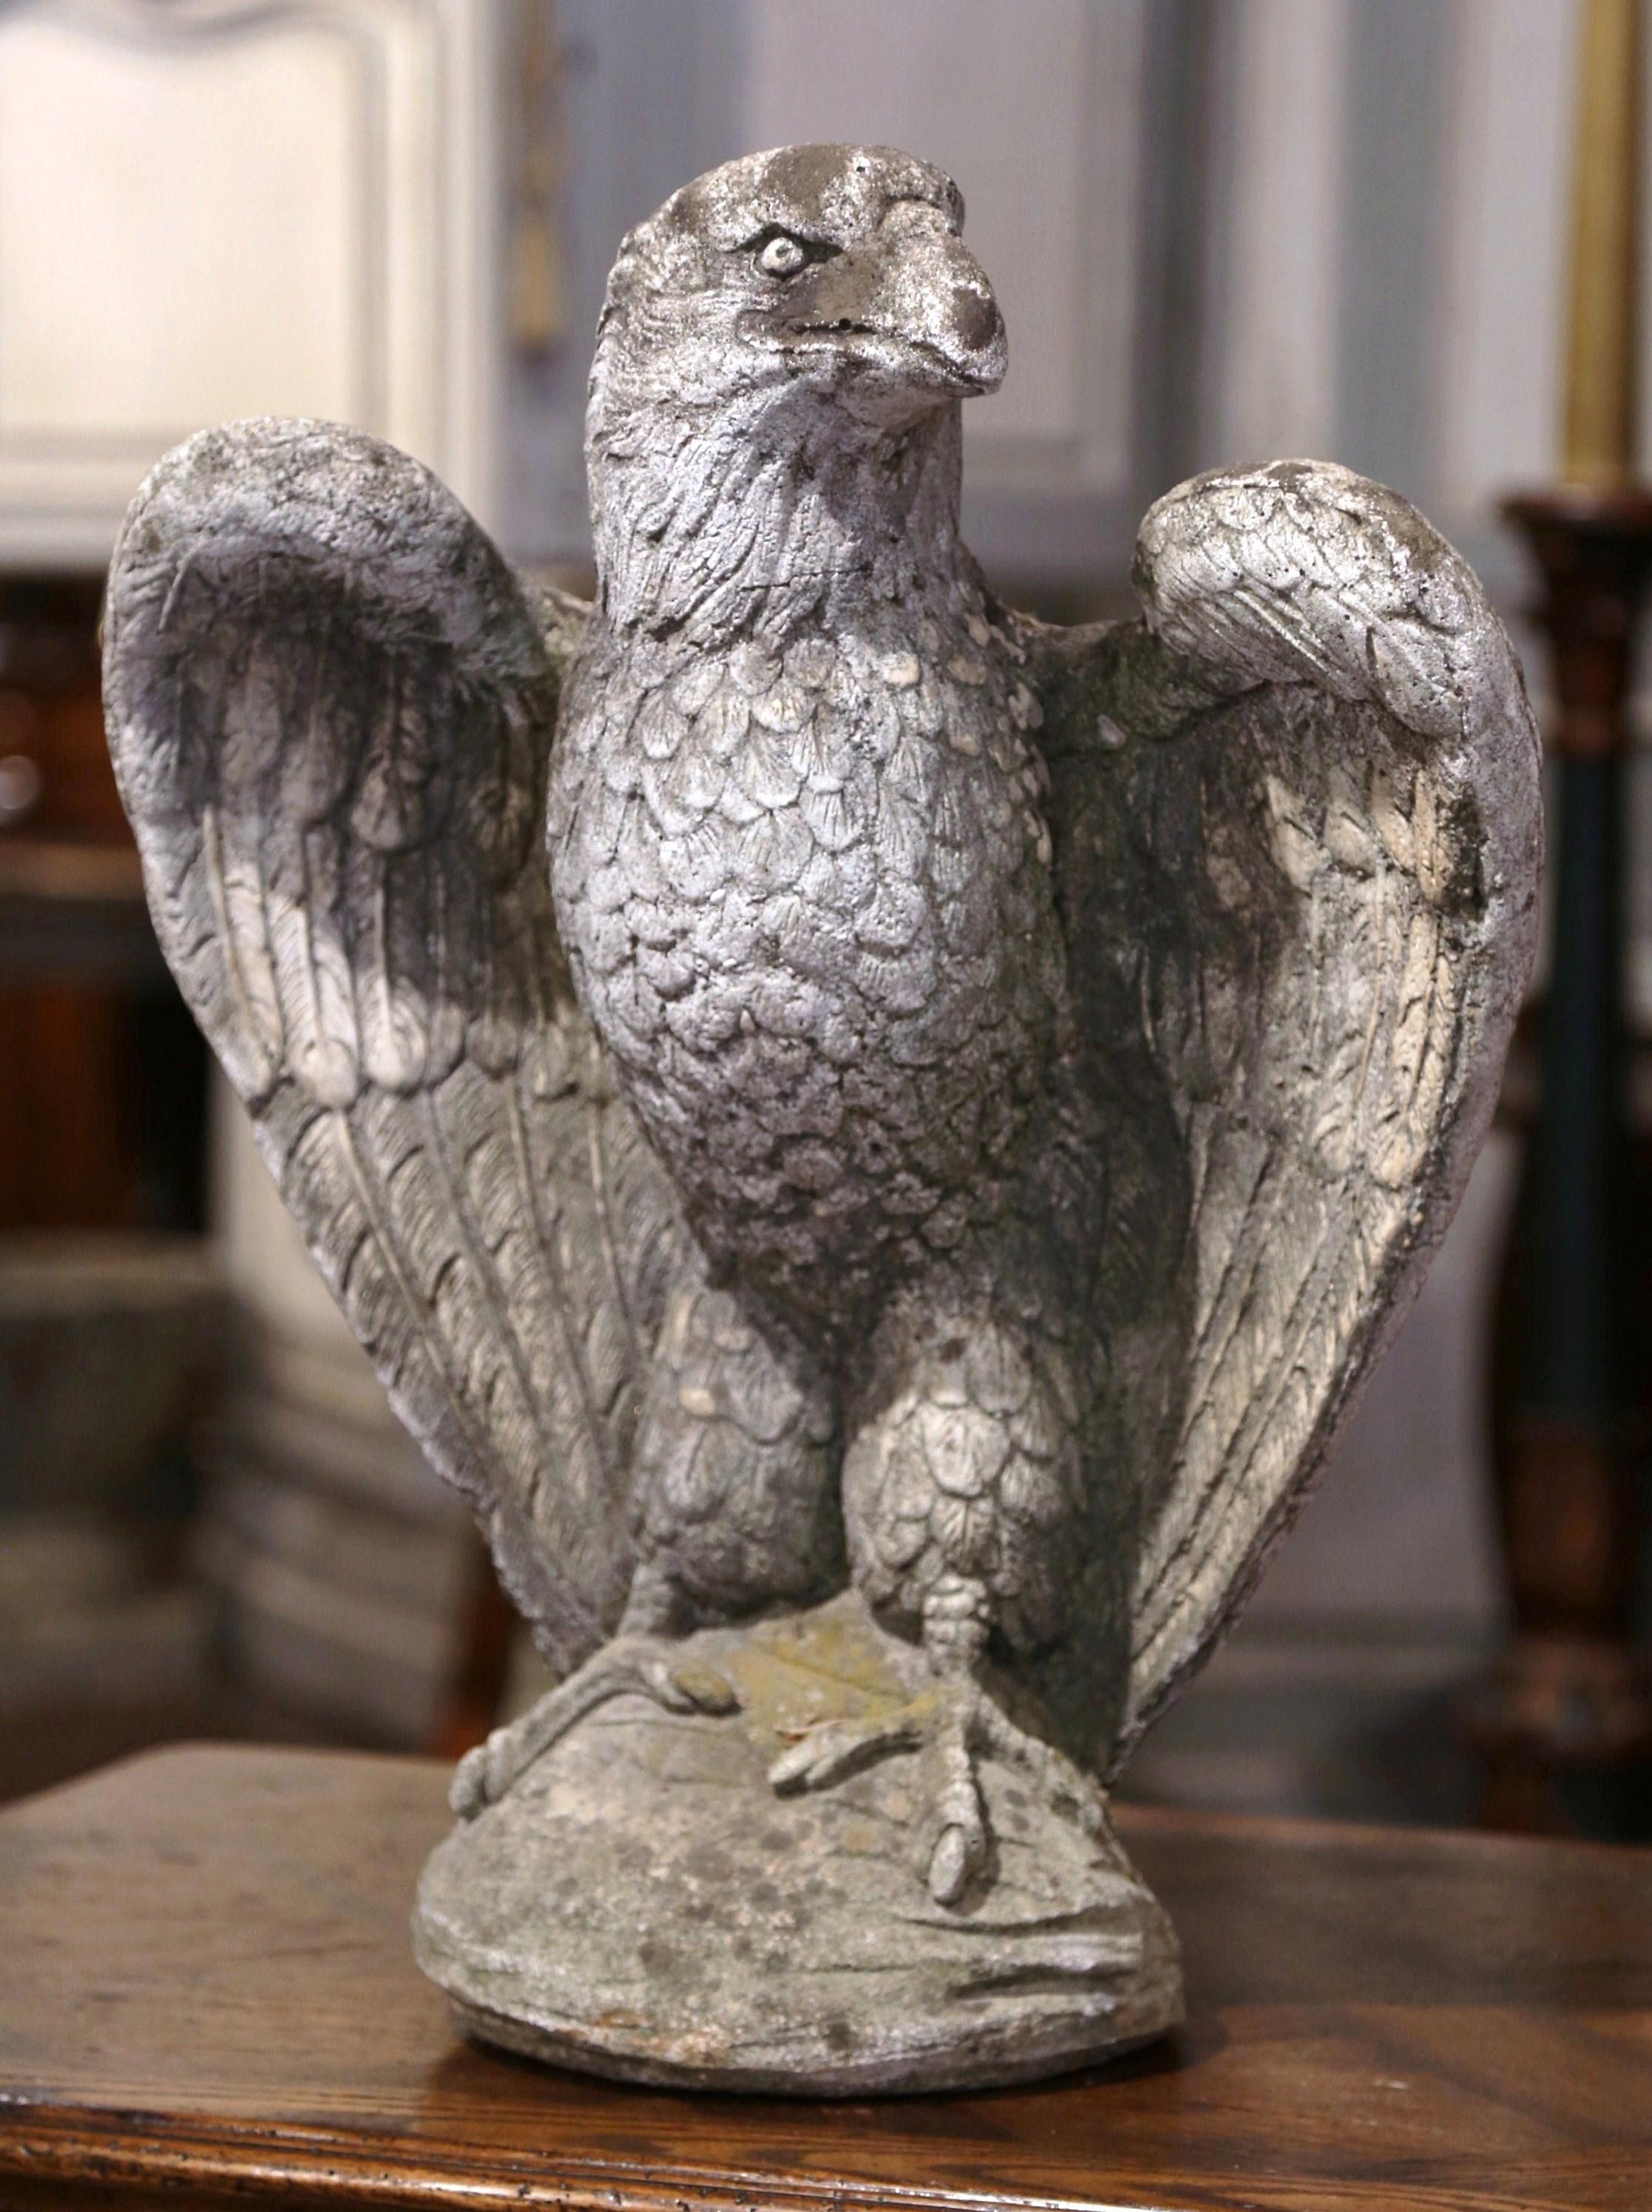 Decorate a garden or a patio with this large antique stone eagle sculpture. Crafted in Southern France circa 1920, the tall piece features an eagle standing on a rock, with its wings fully opened. The bird figure is in excellent condition with a